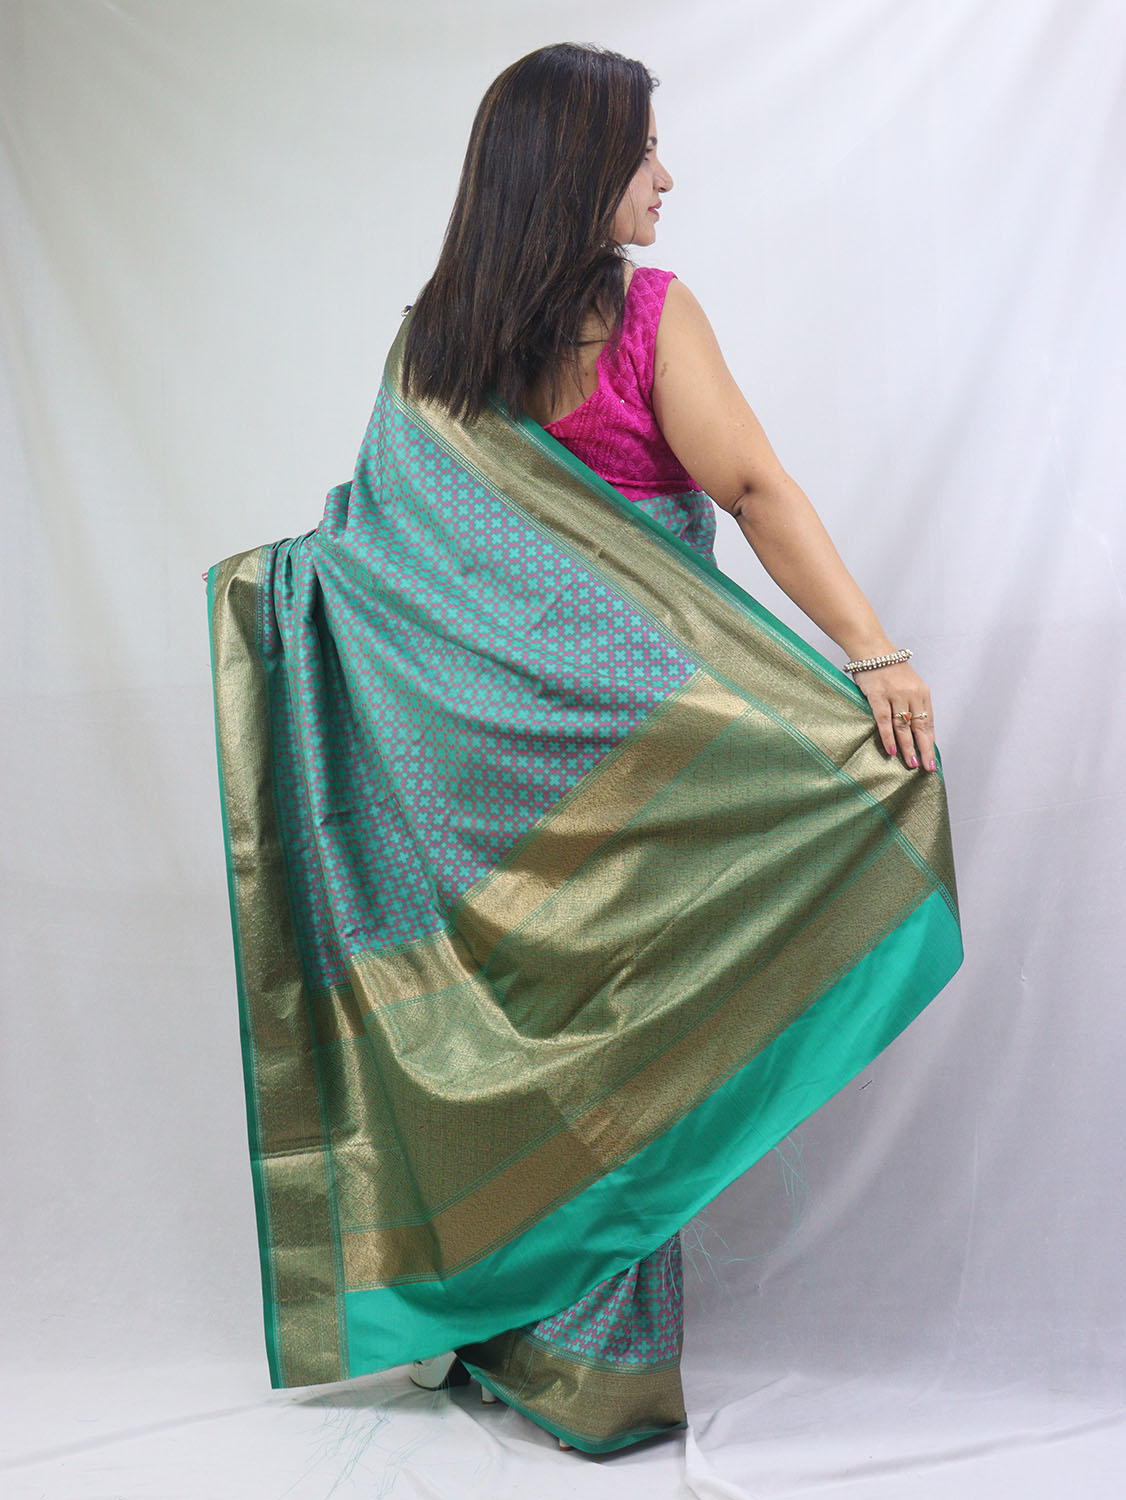 Shop Now for Blue Banarasi Soft Silk Saree with Contrast Border - Latest Arrival! - Luxurion World